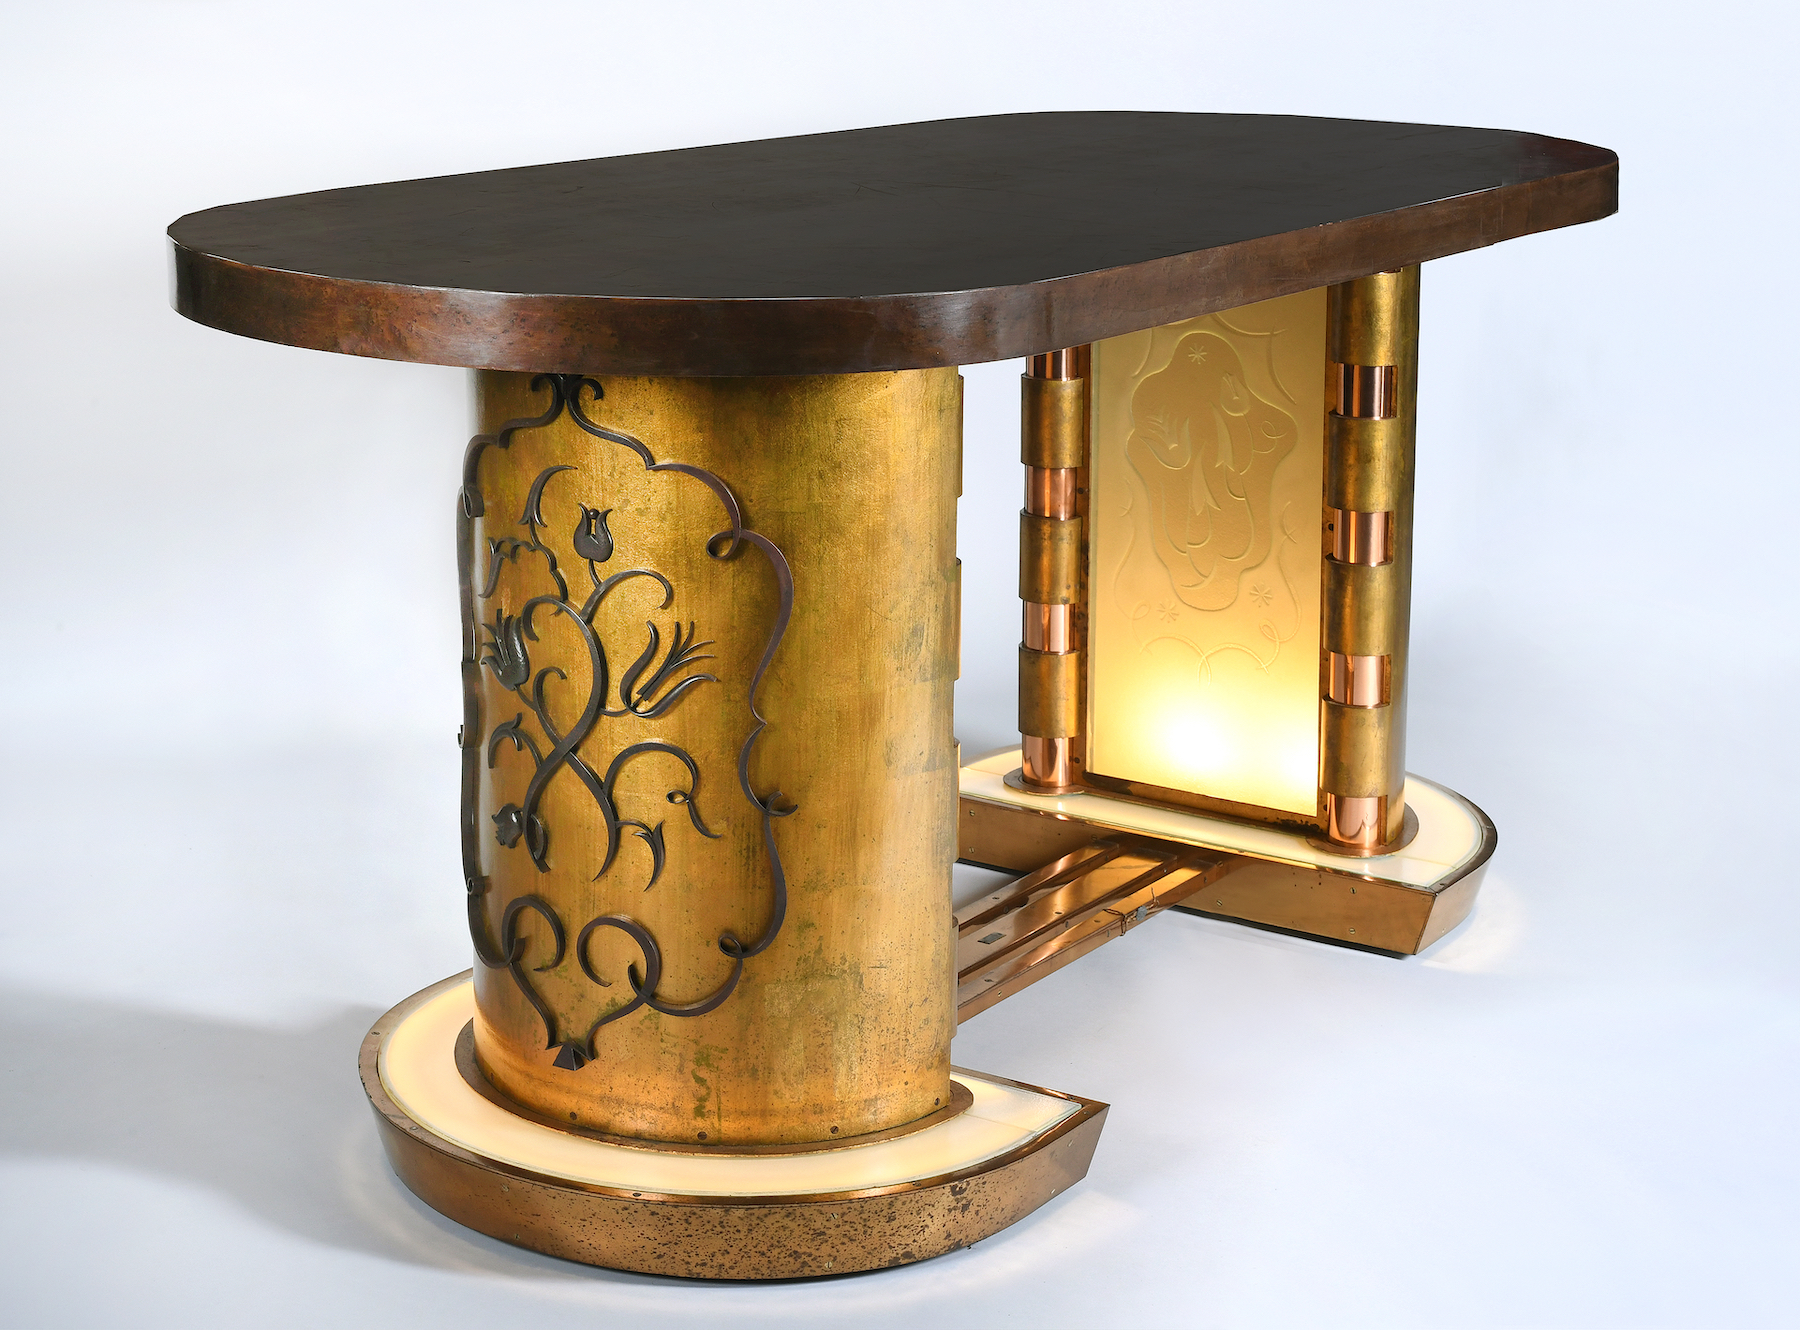 1937 Marcel Bergue 'table lumineuse' – a table with lights in its feet